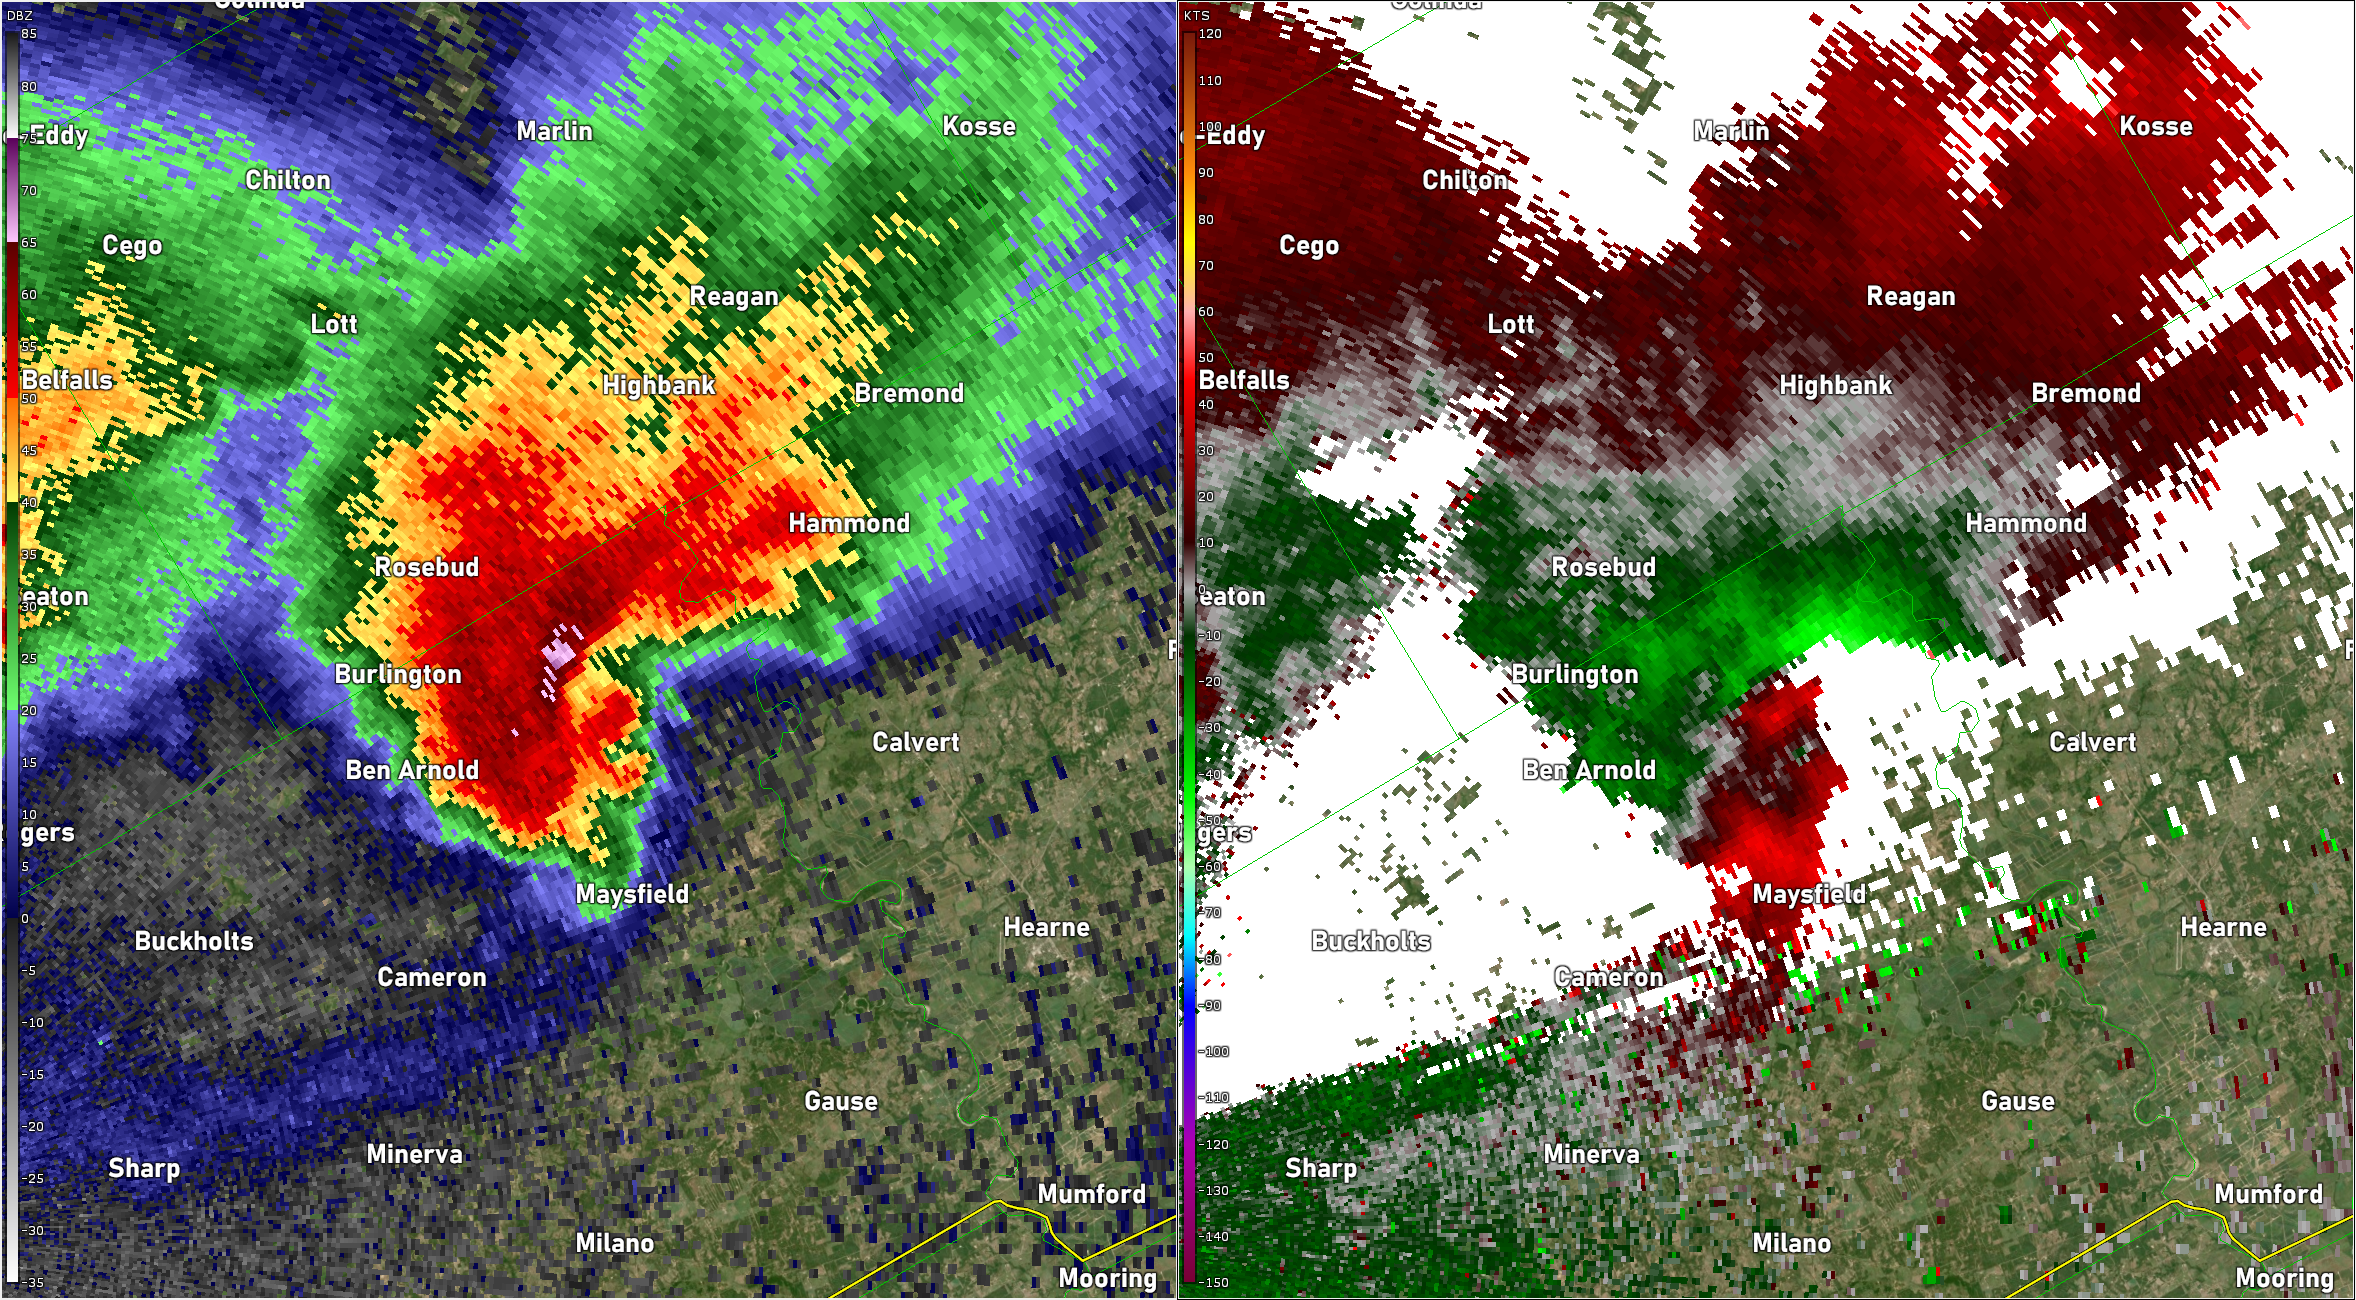 Reflectivity (left) and velocity (right) of a severe thunderstorm on April 12, 2022 in Central Texas. Notice 